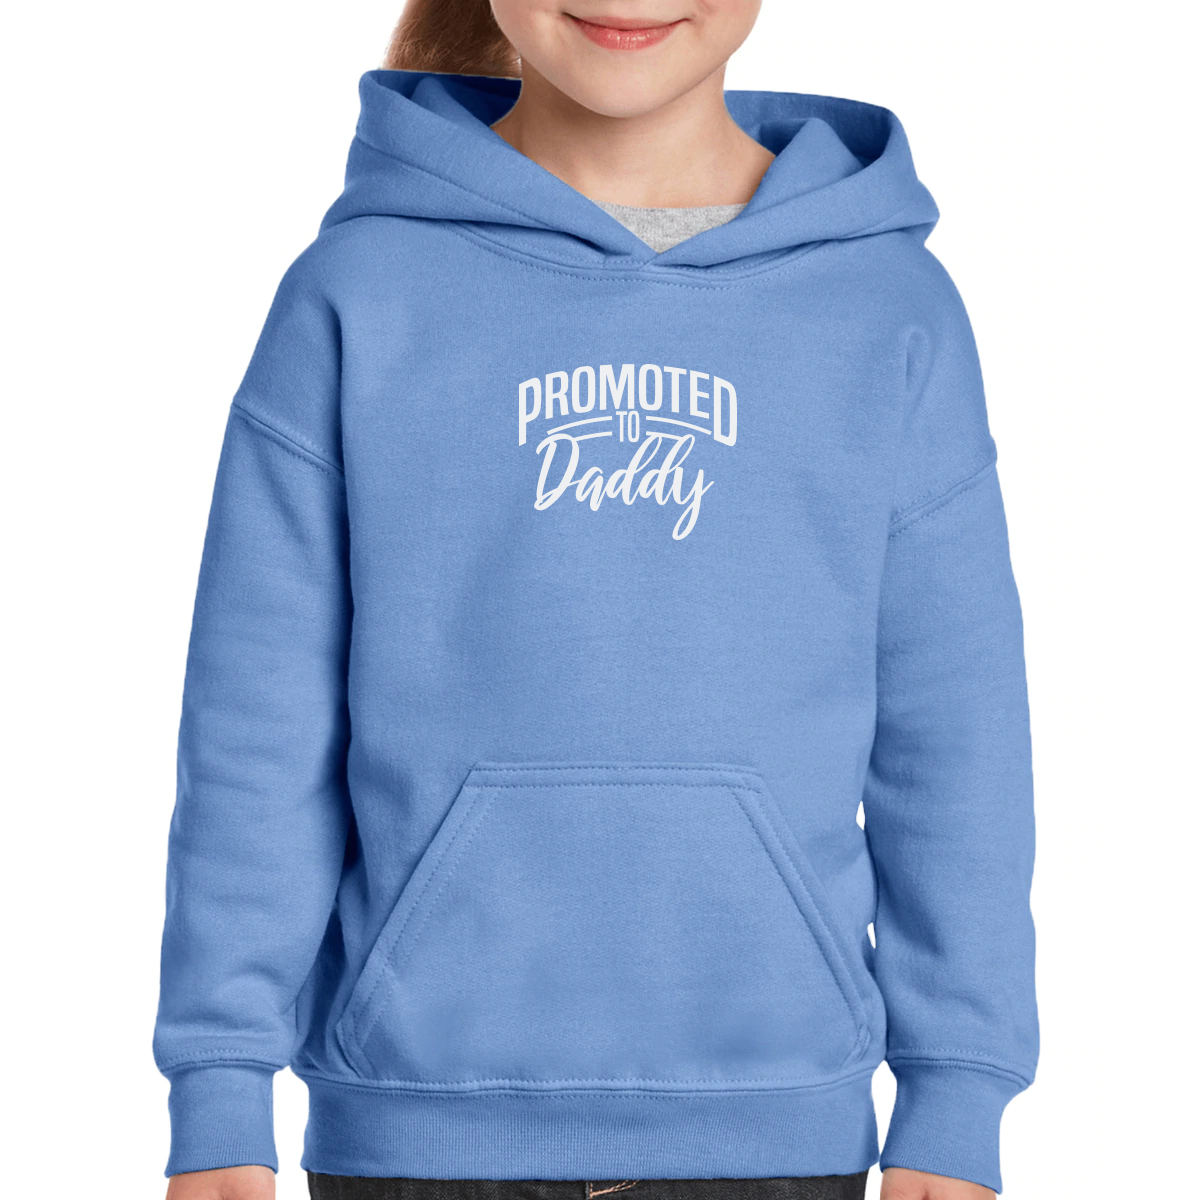 Promoted to daddy Kids Hoodie | Blue